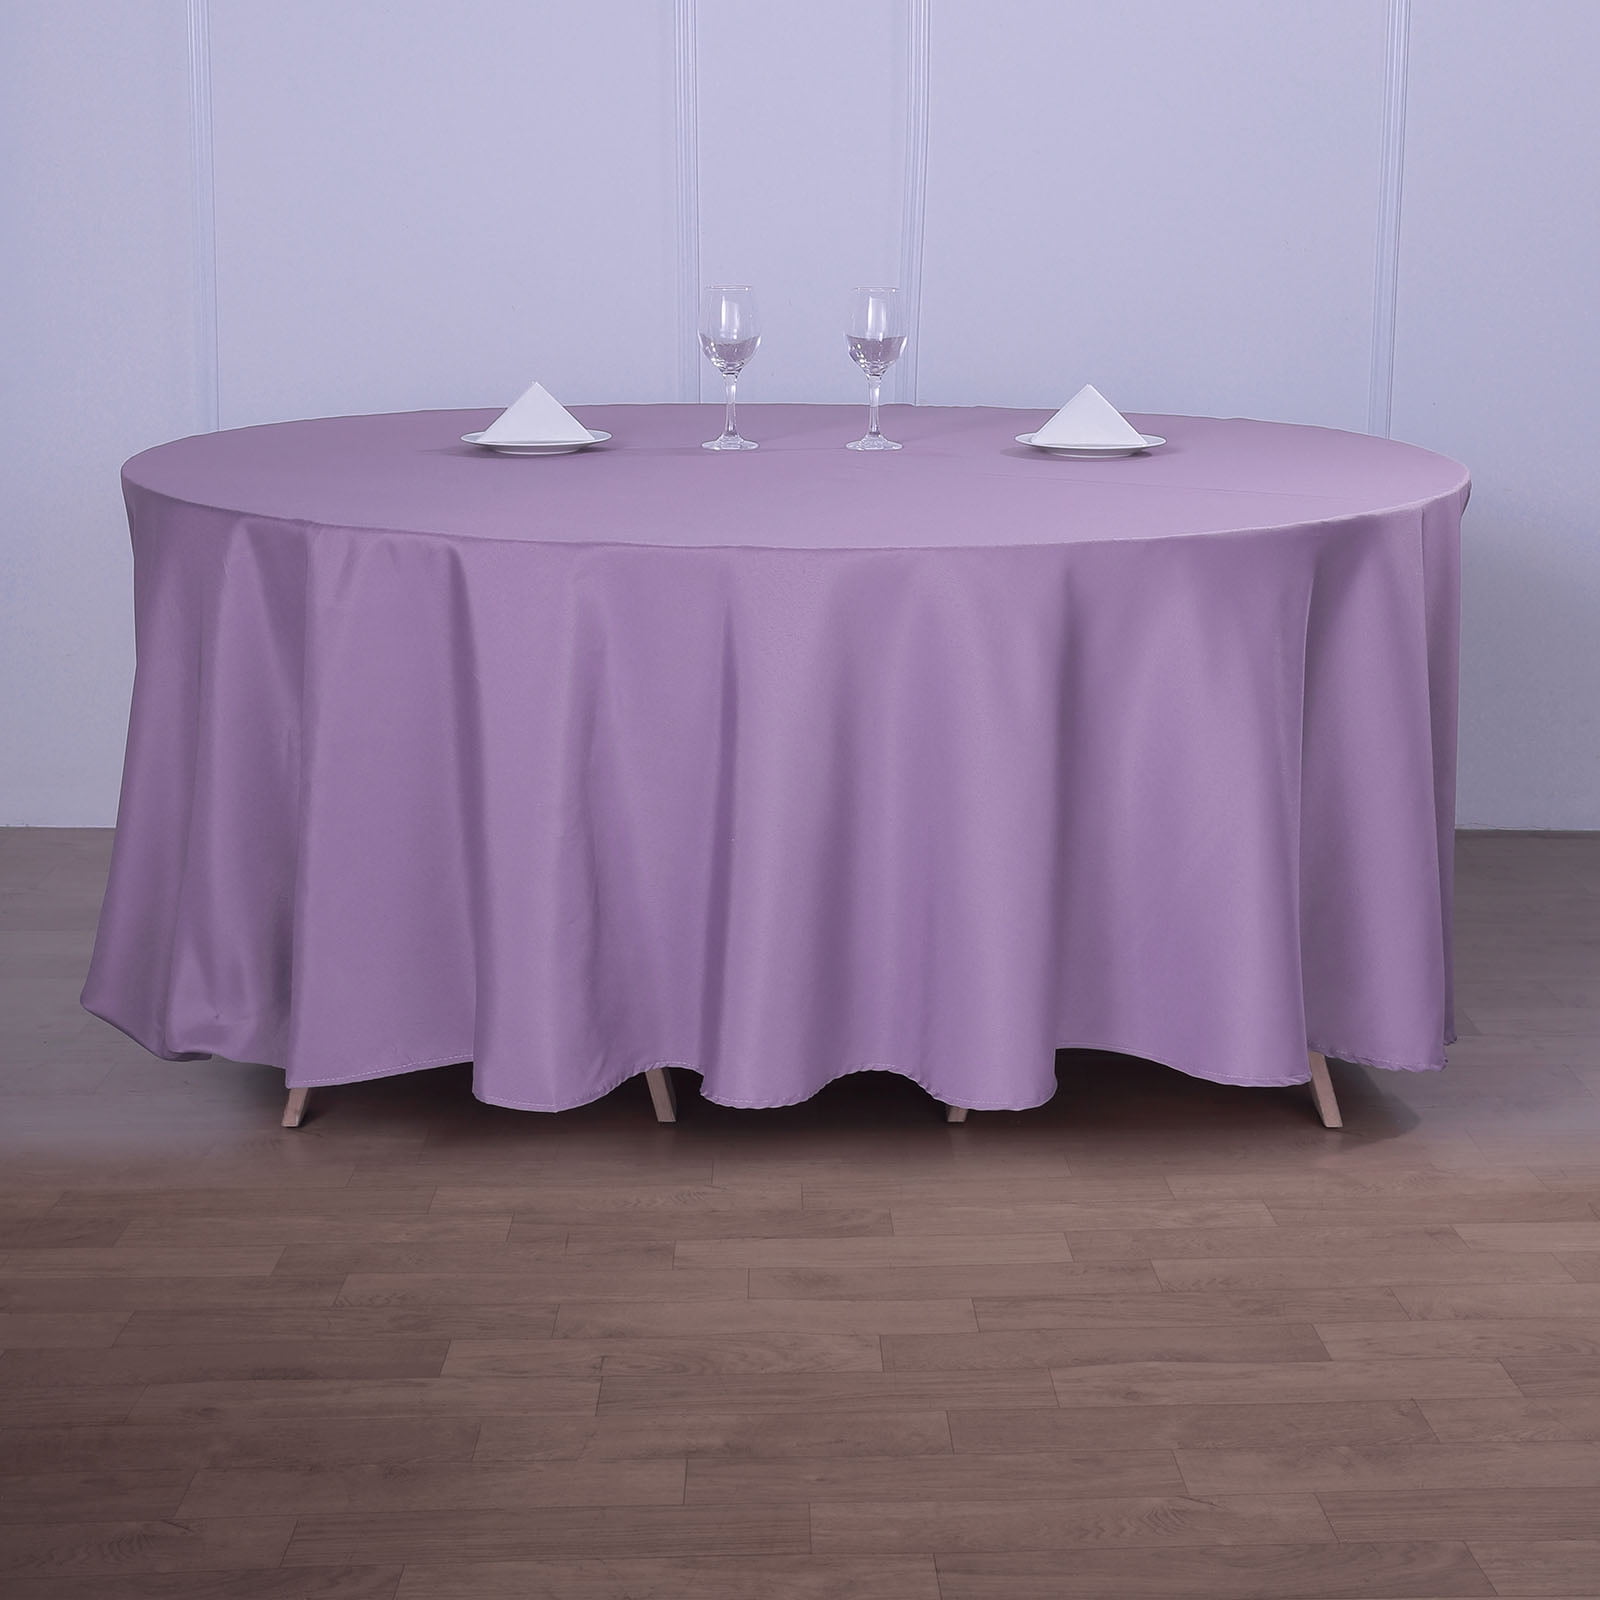 14 LOT 120" inch ROUND Tablecloth Polyester WEDDING 25 COLOR 5' Ft table cover 